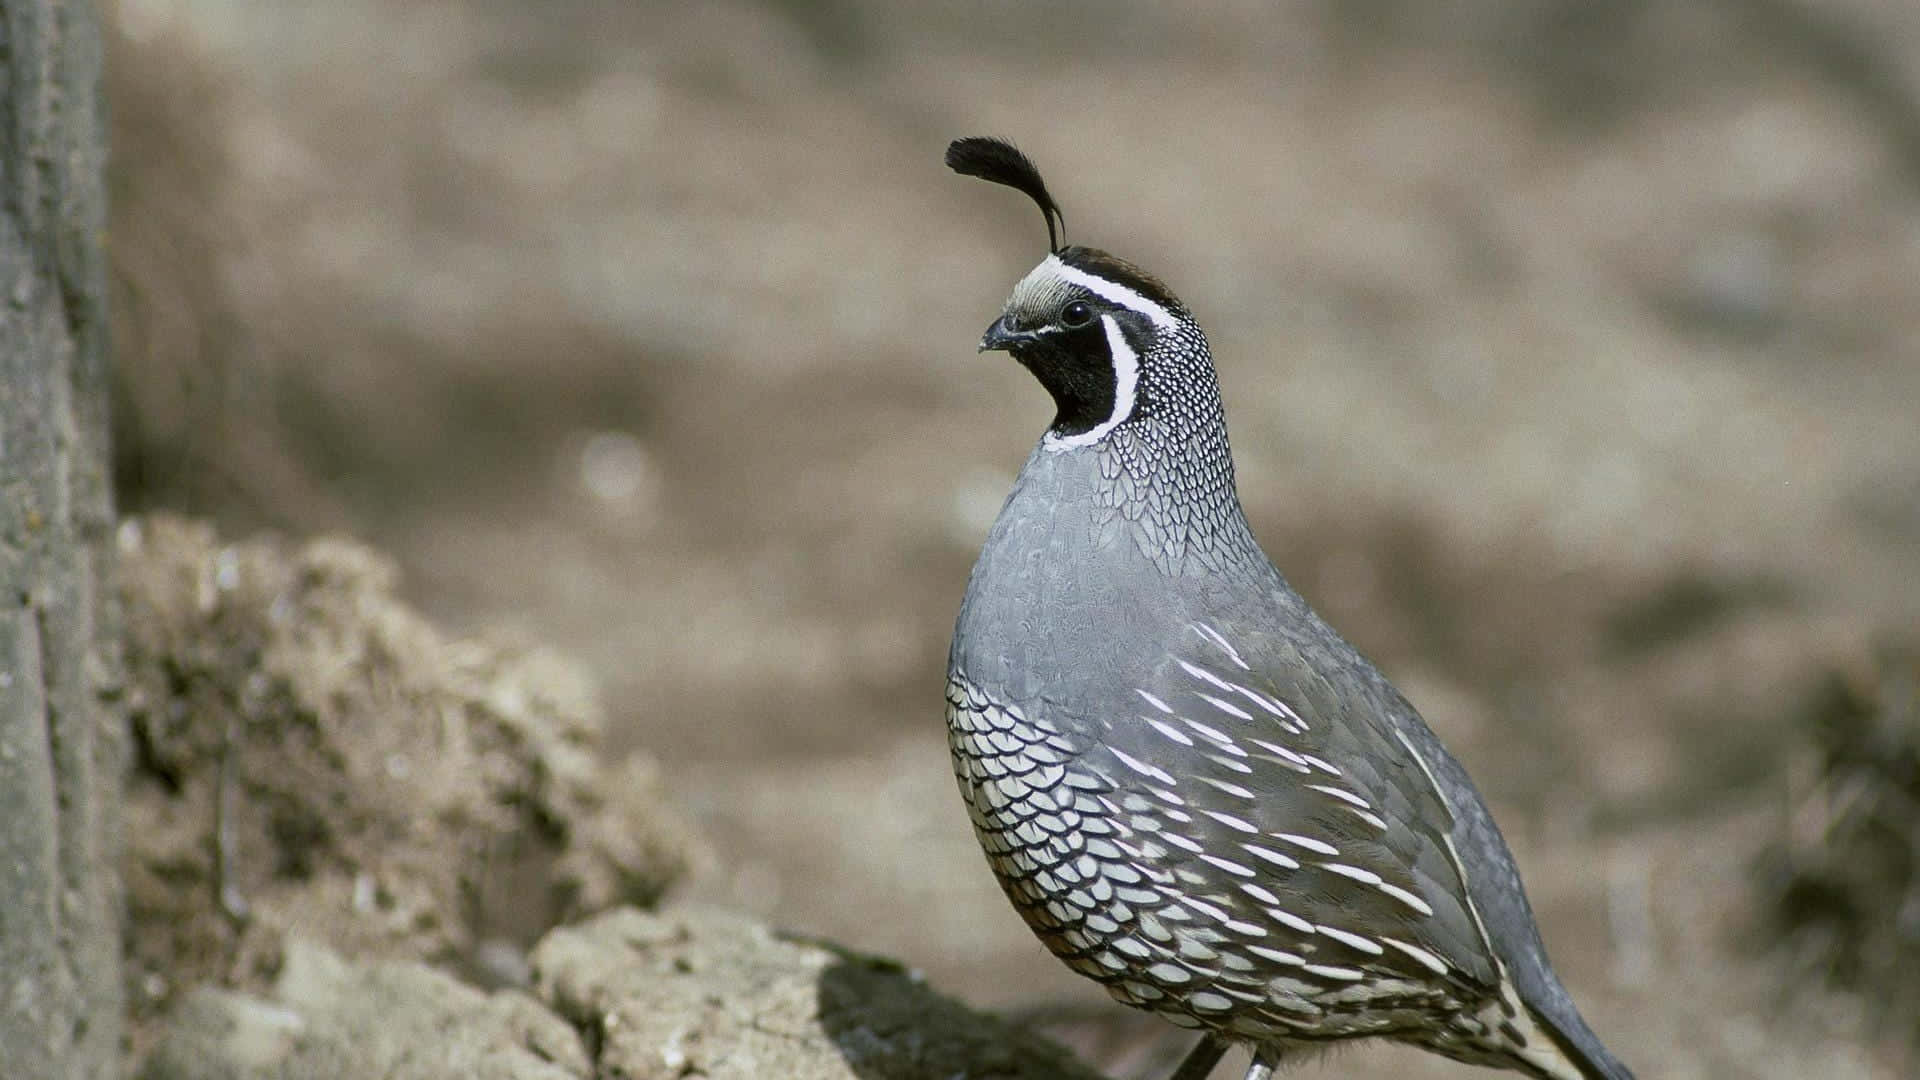 Stunning Quail Perched on a Rock